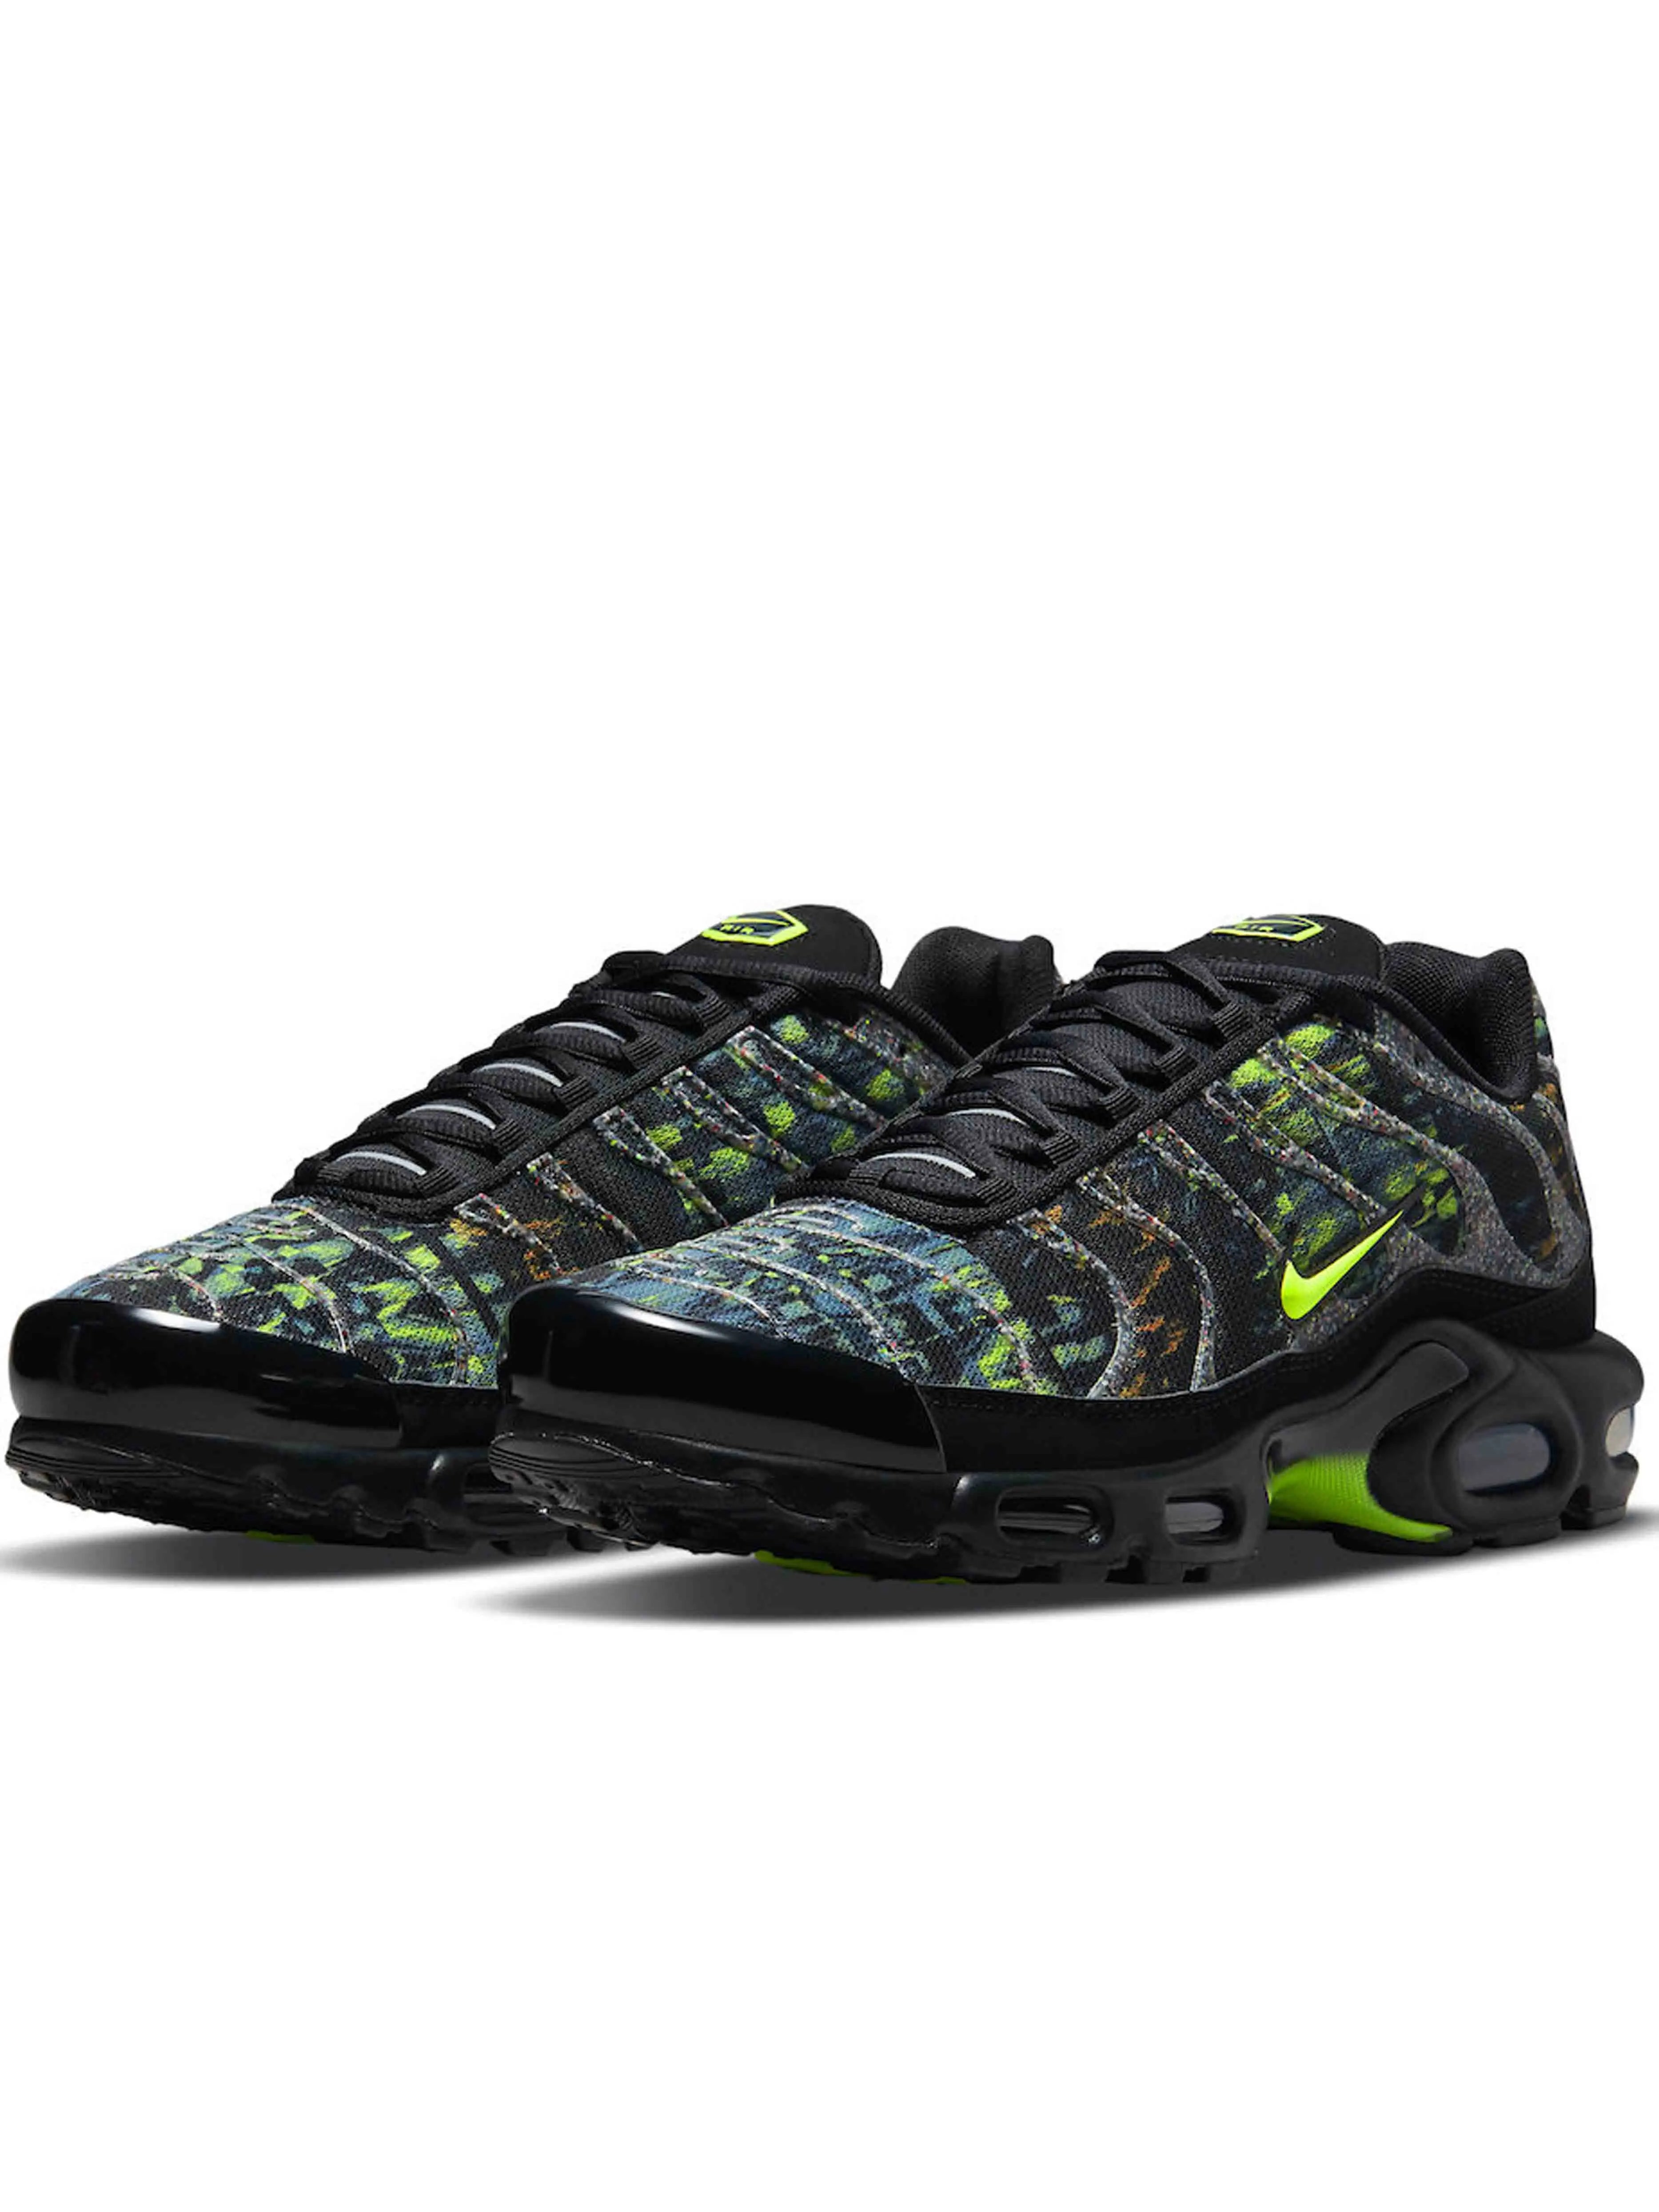 Nike Air Max Plus Sustainable Black Volt for Sale, Authenticity Guaranteed